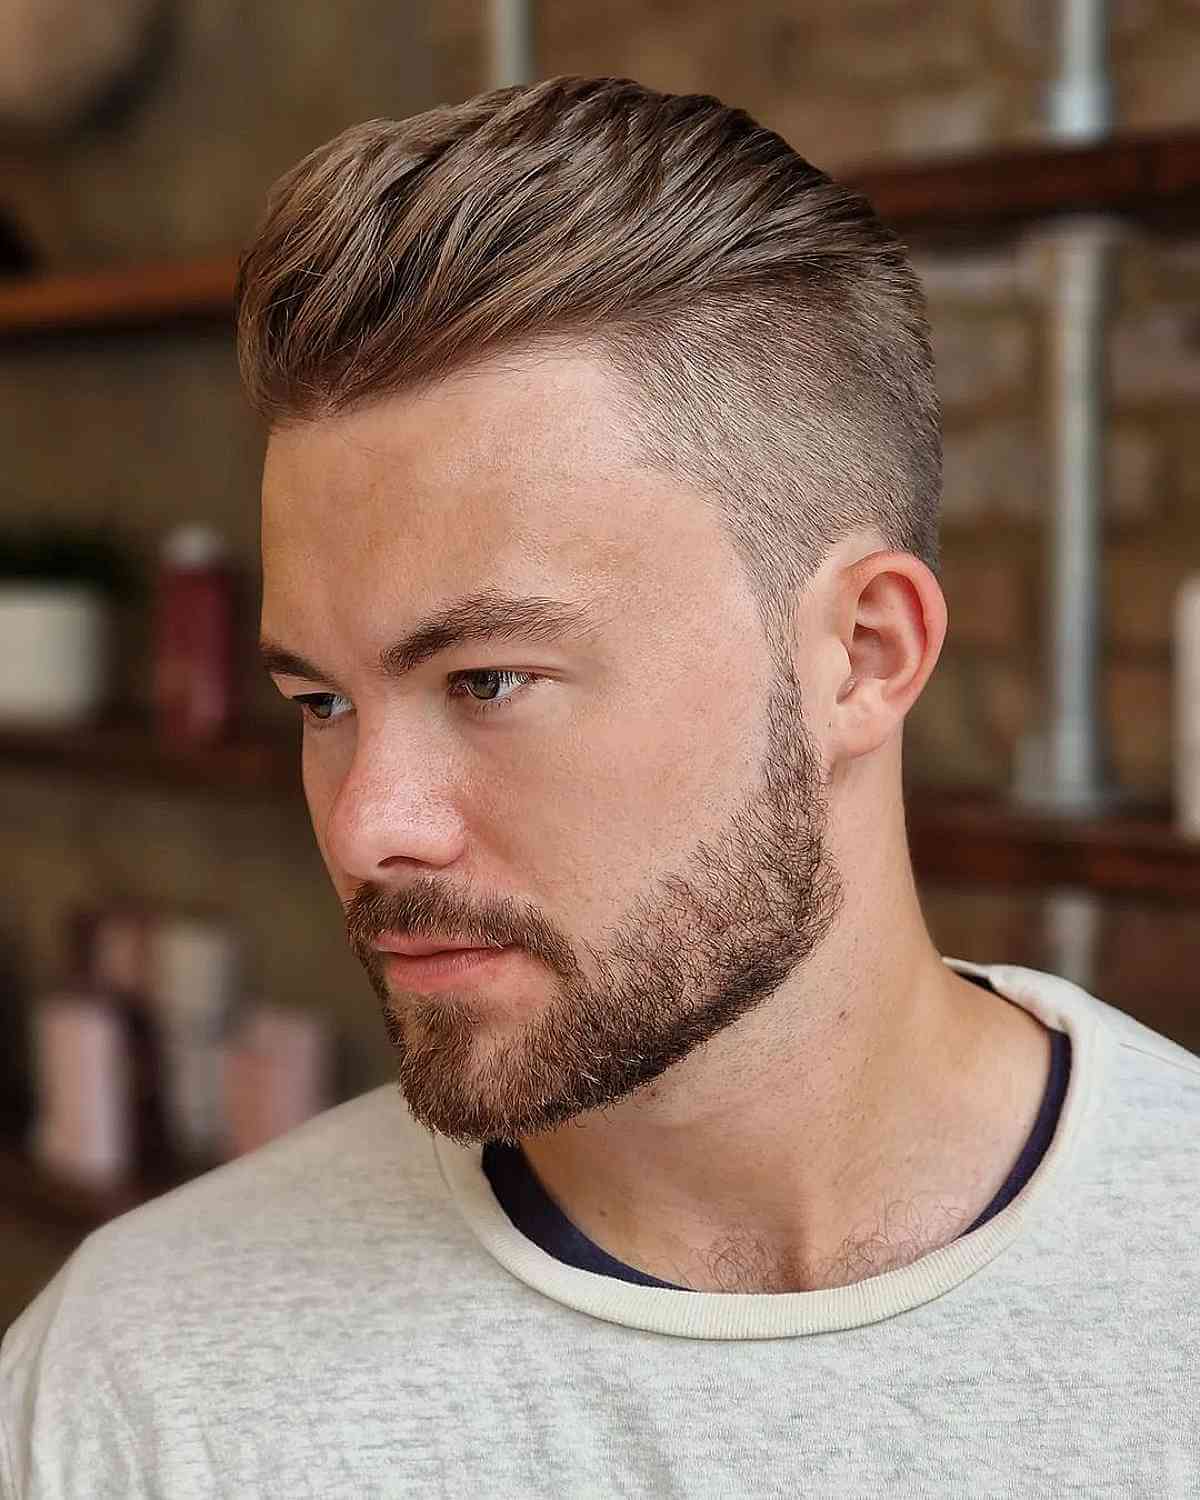 Hair Color for Men: 34 Examples Ranging from Vivids to Natural Hues